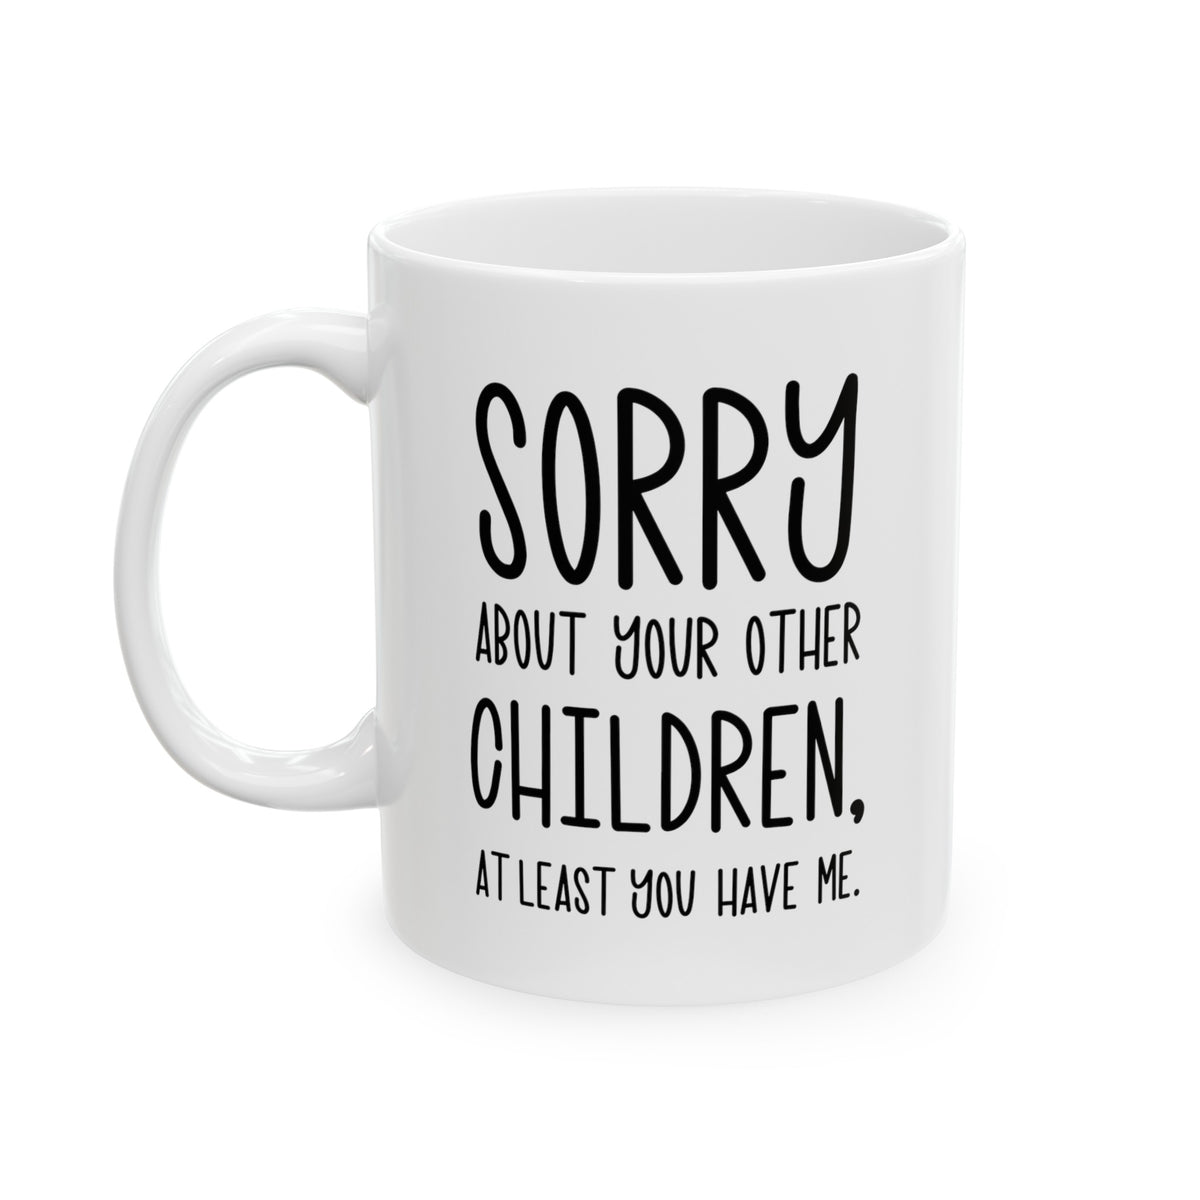 Funny Christmas Mother’s Day Coffee Mug For Mom - Sorry about your other children, atleast you have me - Best Birthday Present From Daughter Son